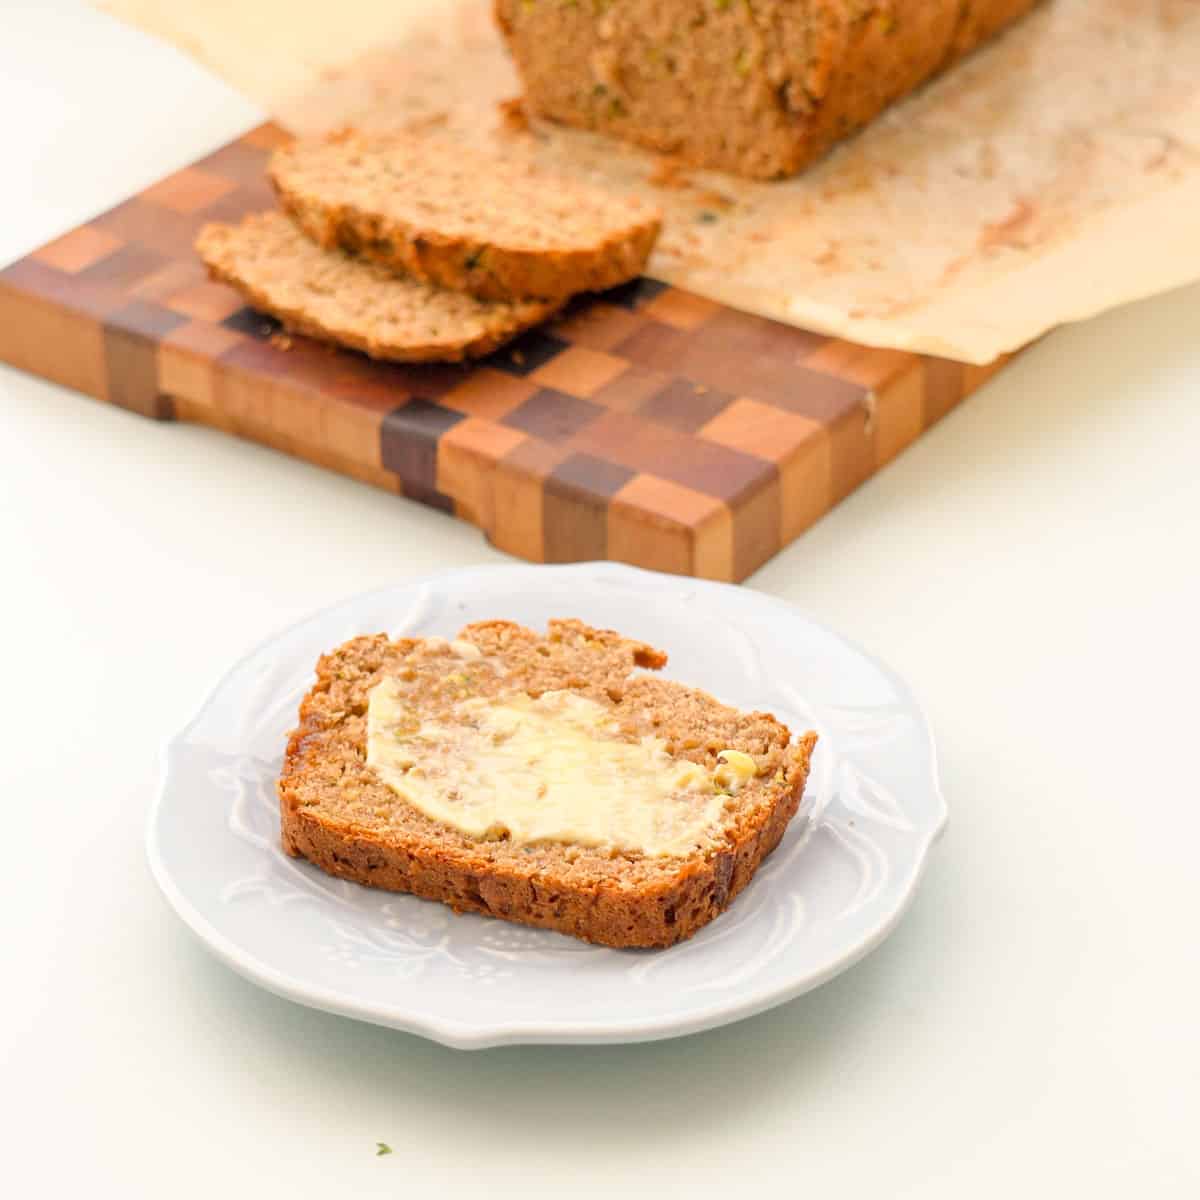 A slice of banana bread spread with butter on a patterned side plate. 